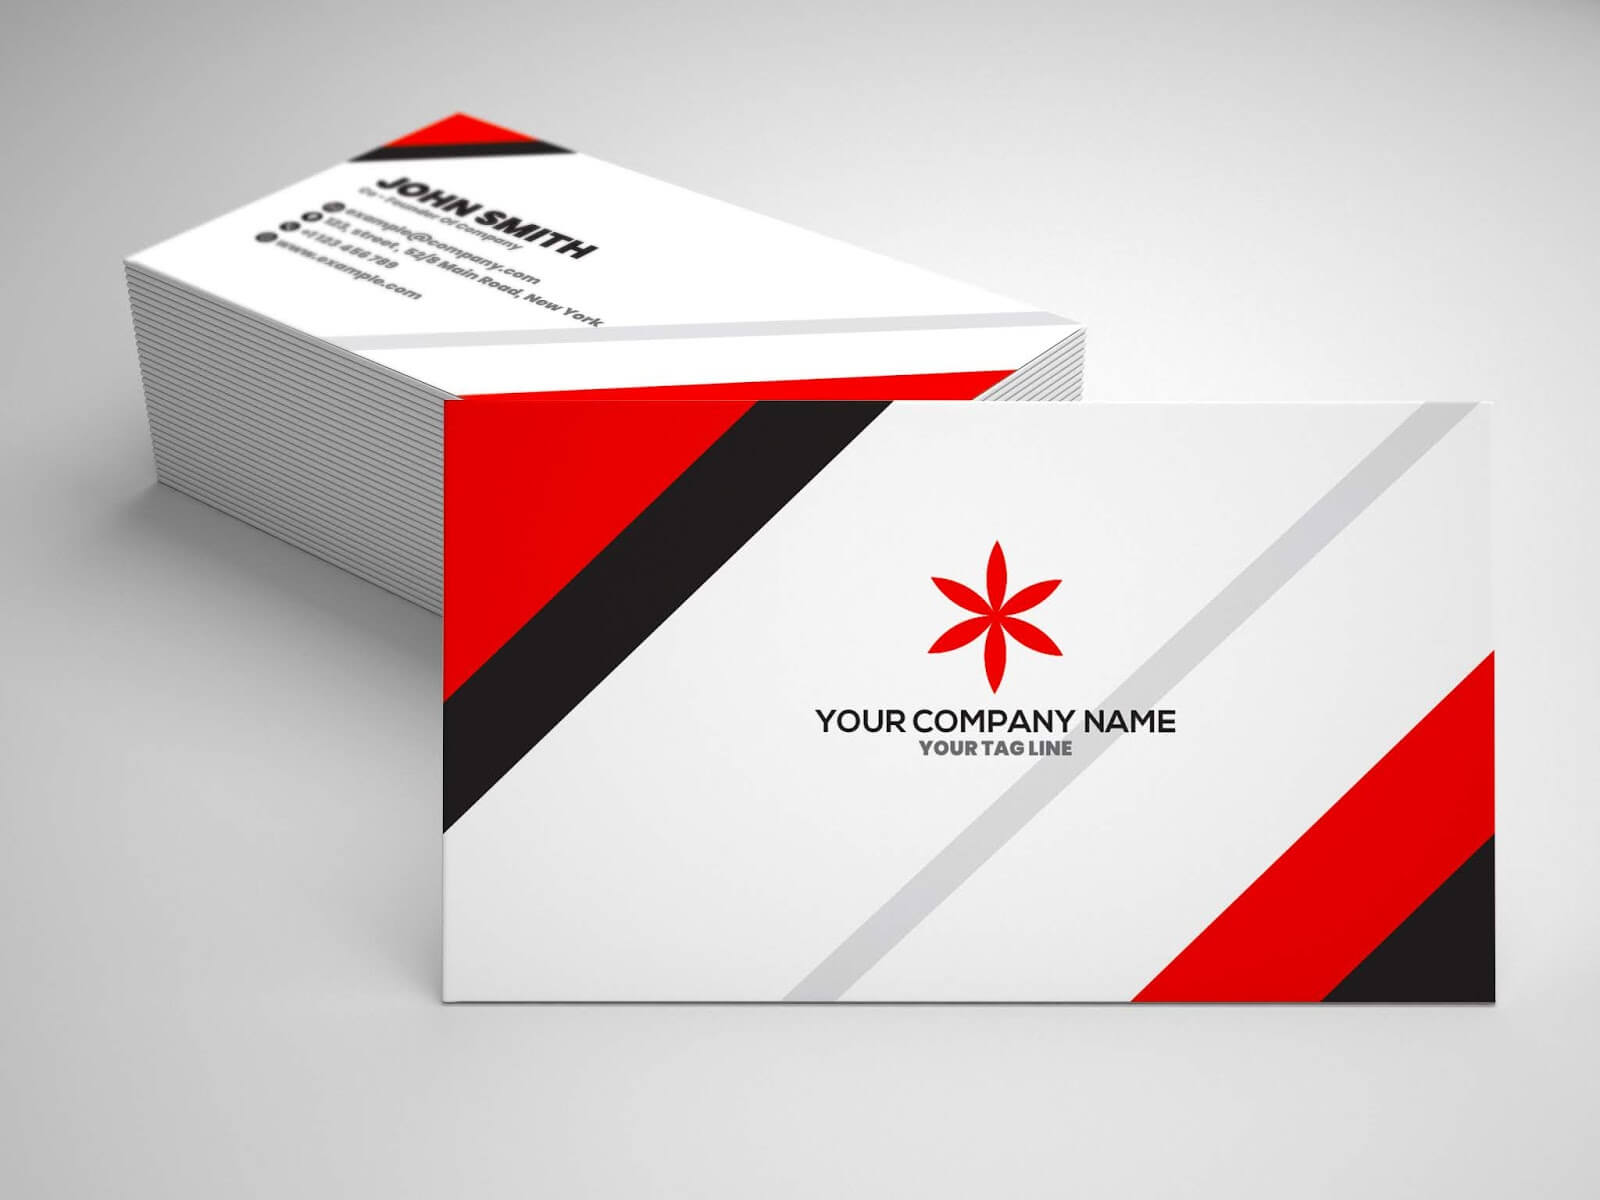 How To Make Double Sided Business Cards In Illustrator Throughout Double Sided Business Card Template Illustrator